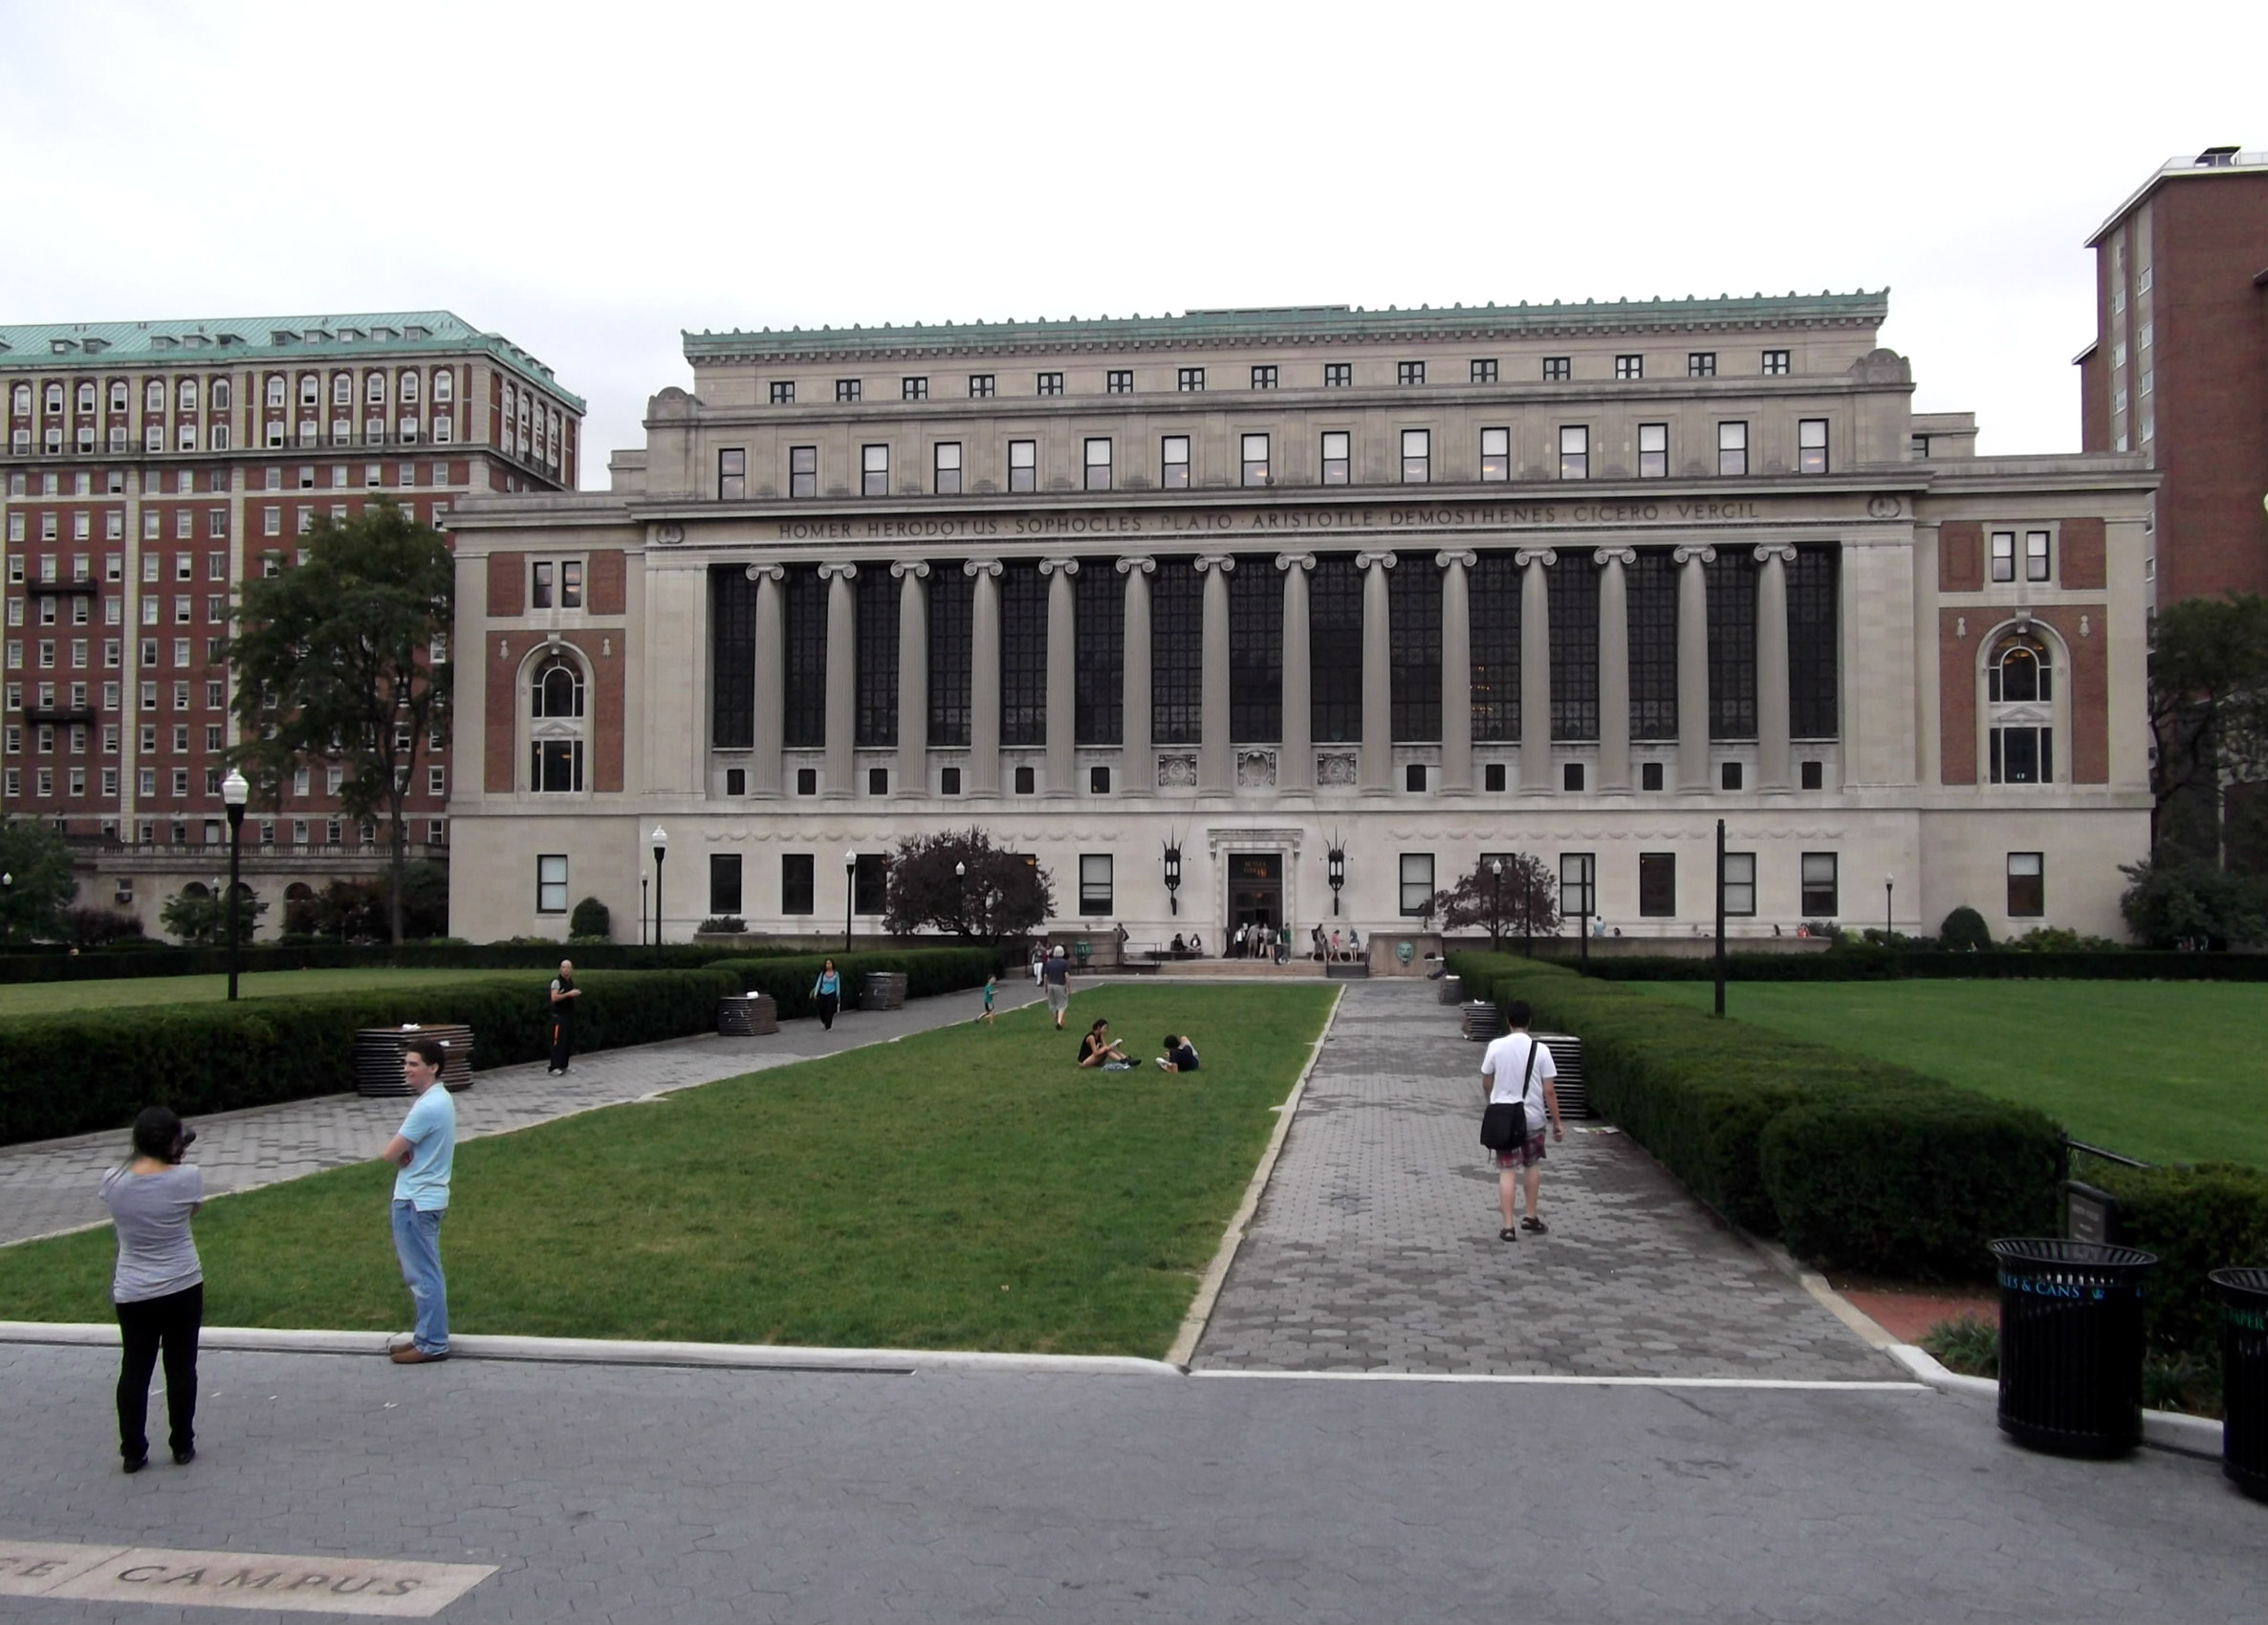 Download this Columbia University Nyc picture